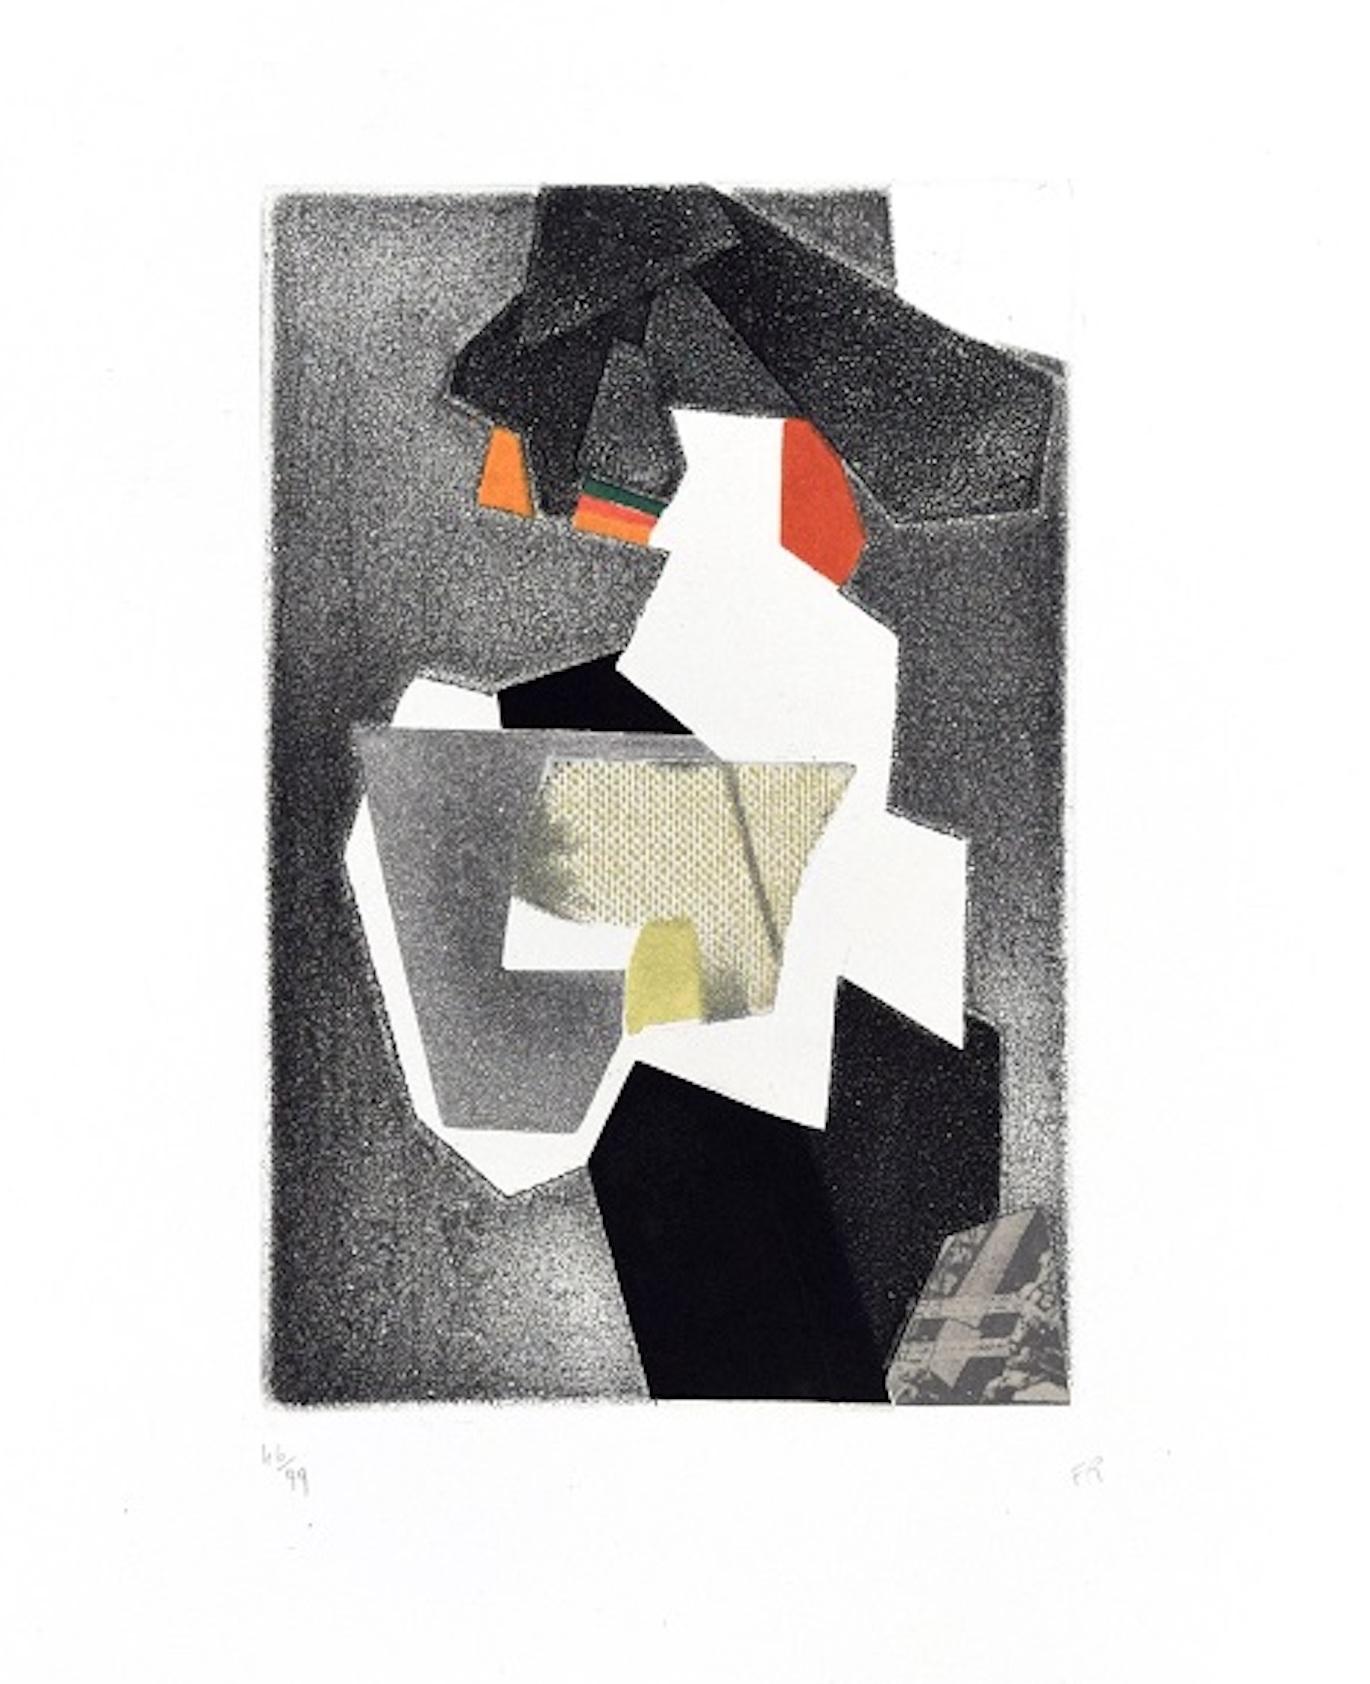 Image dimensions: 20.3x13.7 cm.

Untitled composition is colored etchings and collages on paper, realized in 1973 by the German artist, Hans Richter, published by La Nuova Foglio, a publishing house of Macerata. 

Monogrammed and numbered in pencil